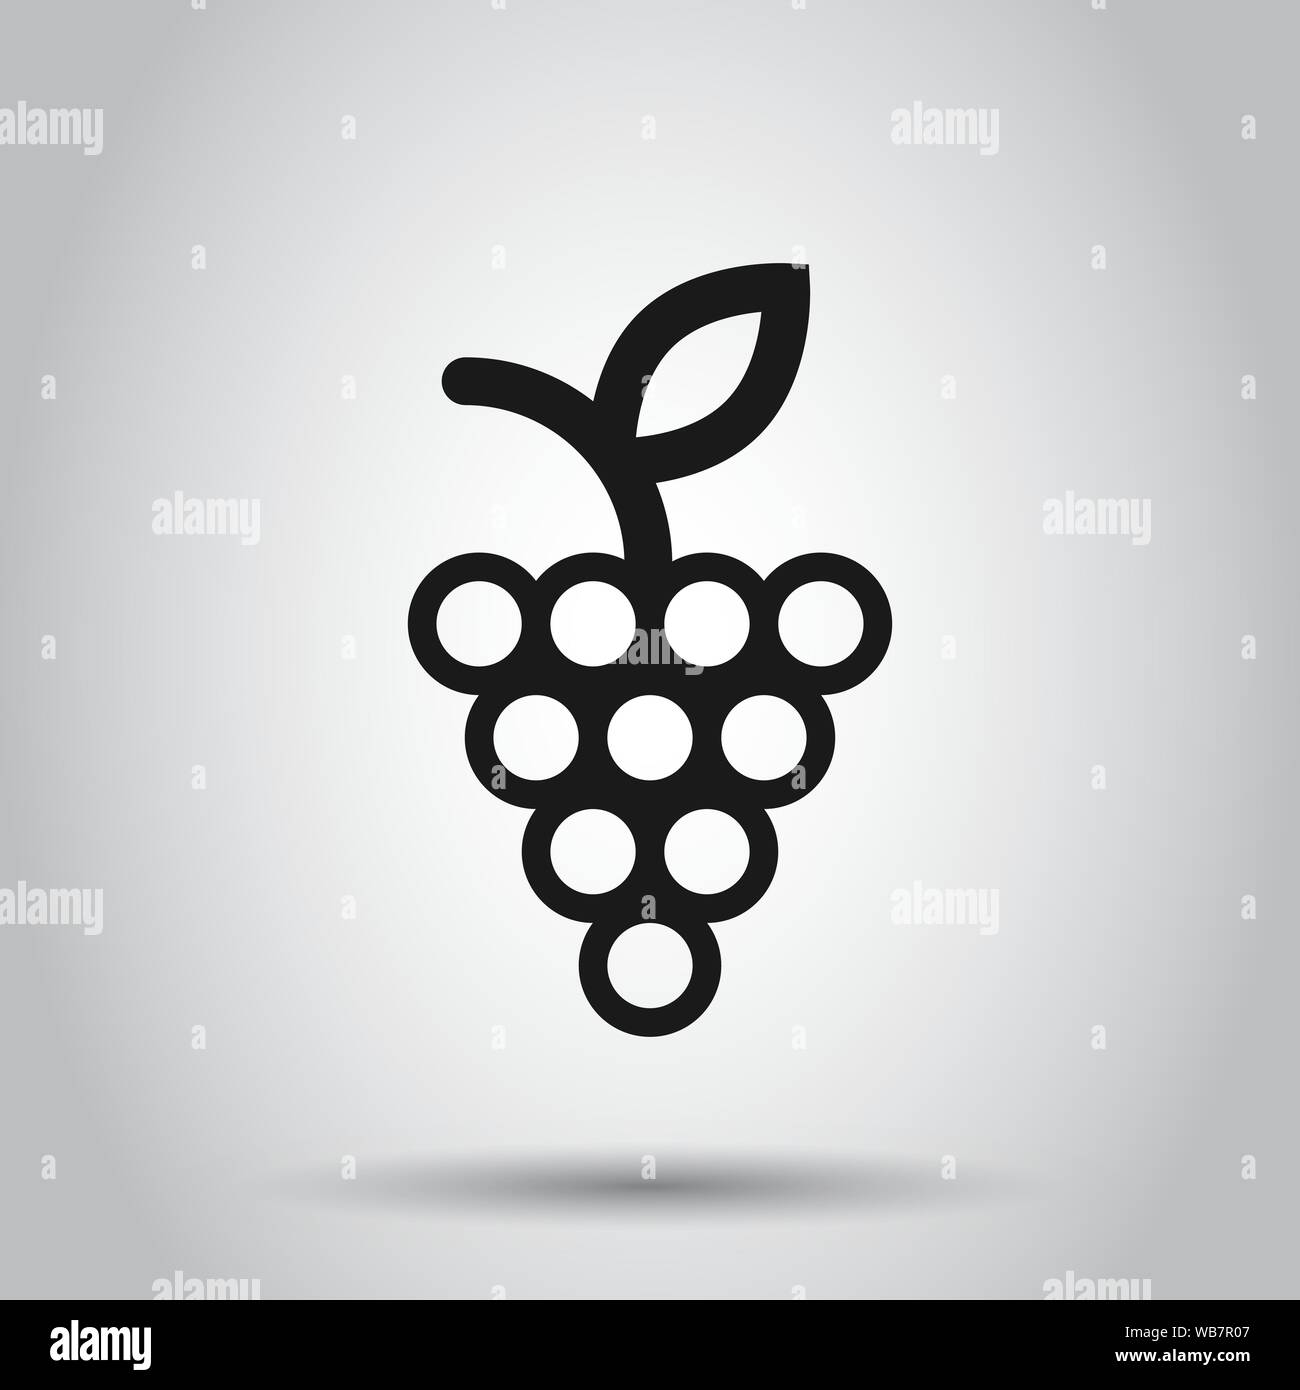 Grape fruits sign icon in flat style. Grapevine vector illustration on isolated background. Wine grapes business concept. Stock Vector